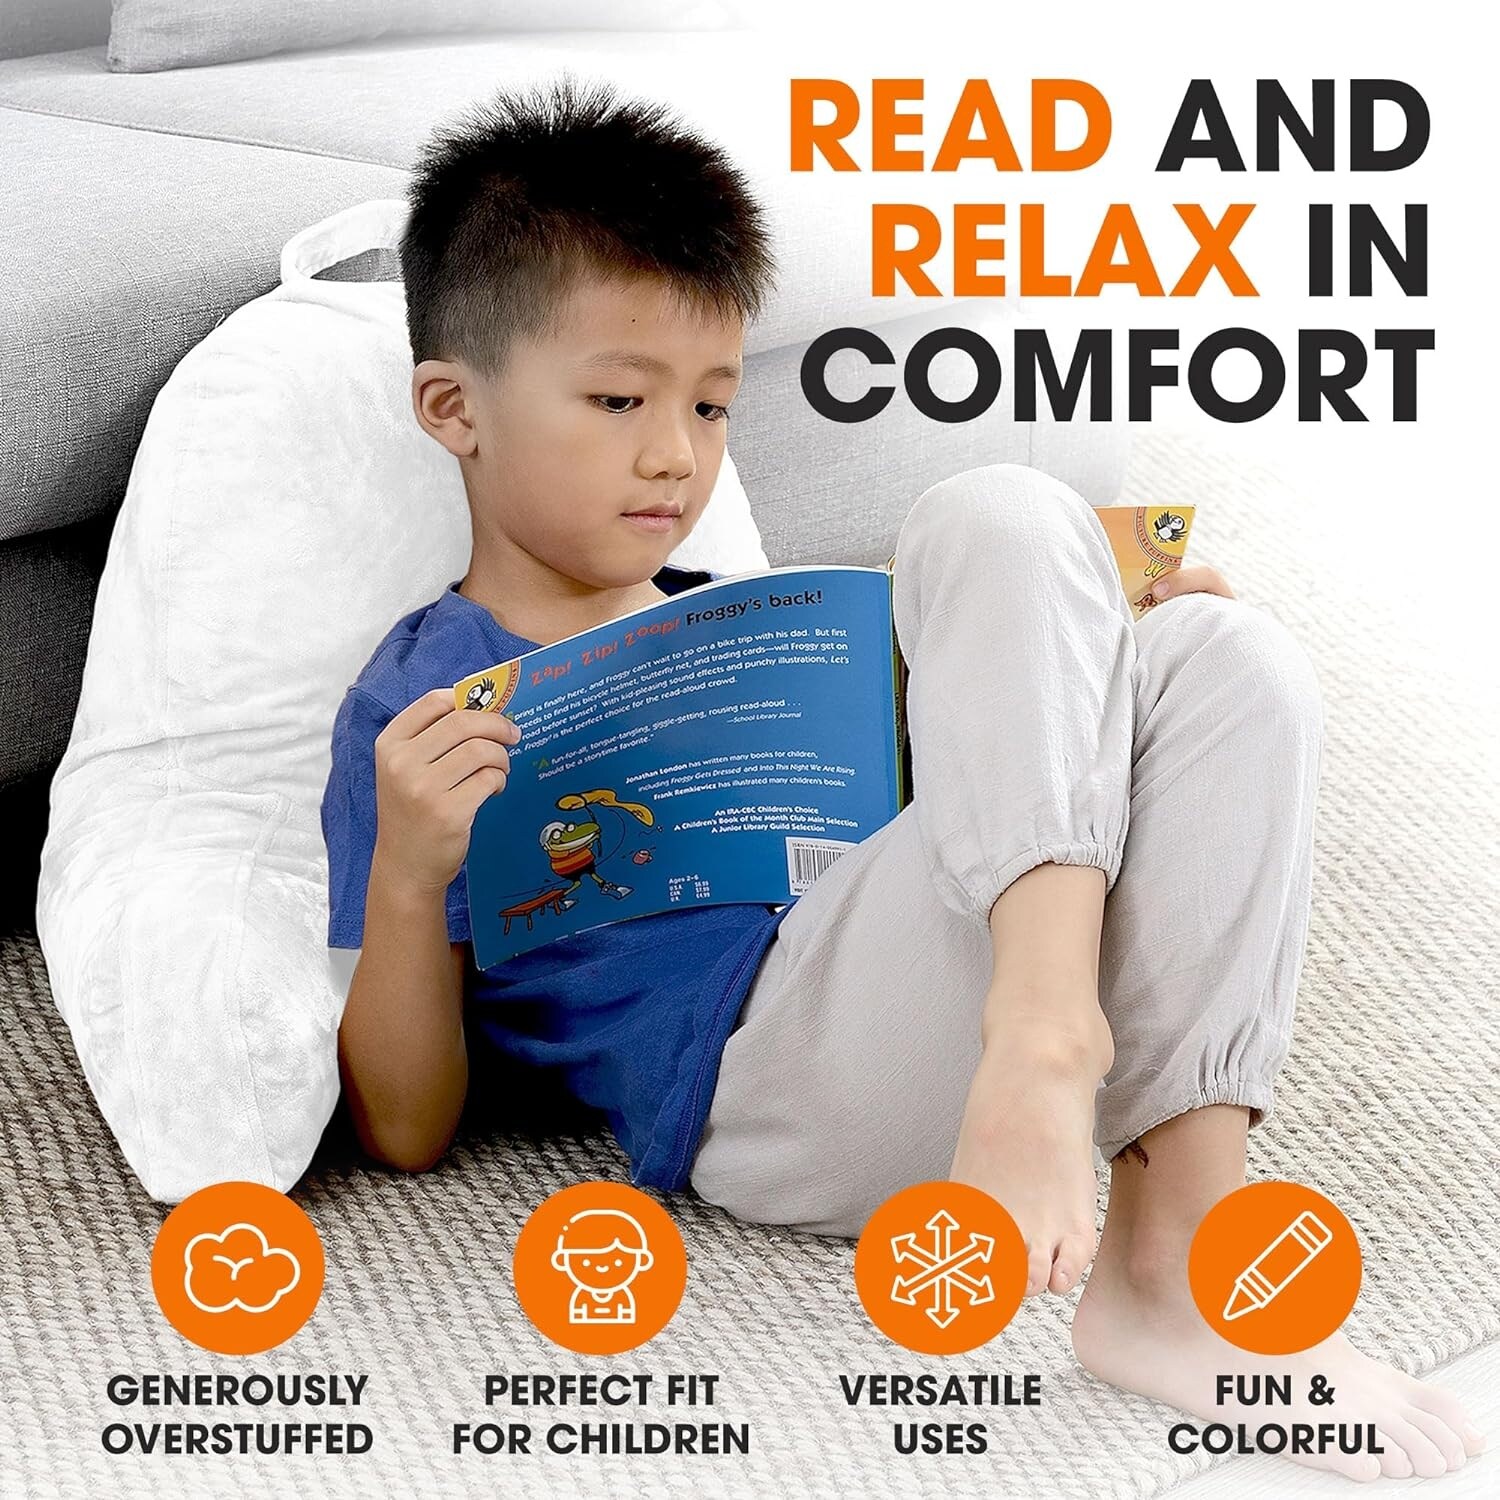 https://ak1.ostkcdn.com/images/products/is/images/direct/12ee5a1fd8c1b4d768d262e9eaeac6b0679b127d/Cheer-Collection-Kids-Memory-Foam-TV-And-Reading-Pillow.jpg